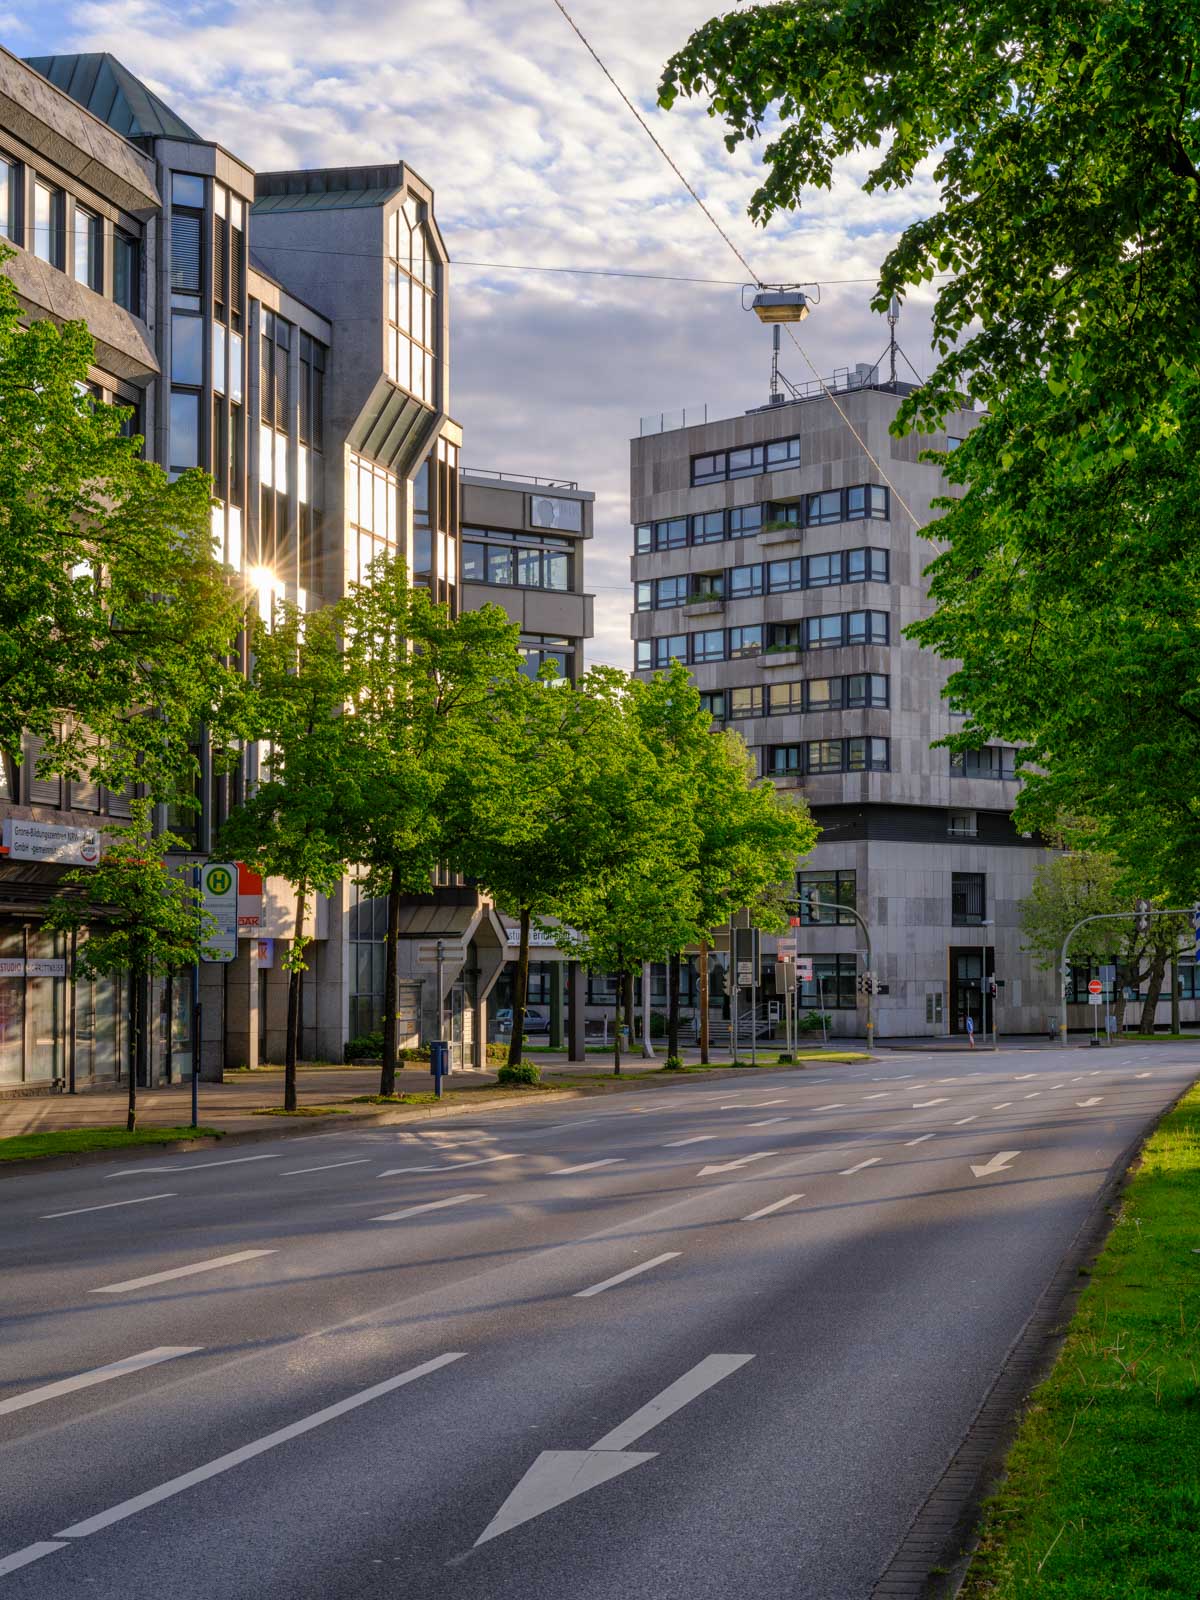 Early morning at the 'Alfred-Bozi-Straße' in May 2021 (Bielefeld, Germany).